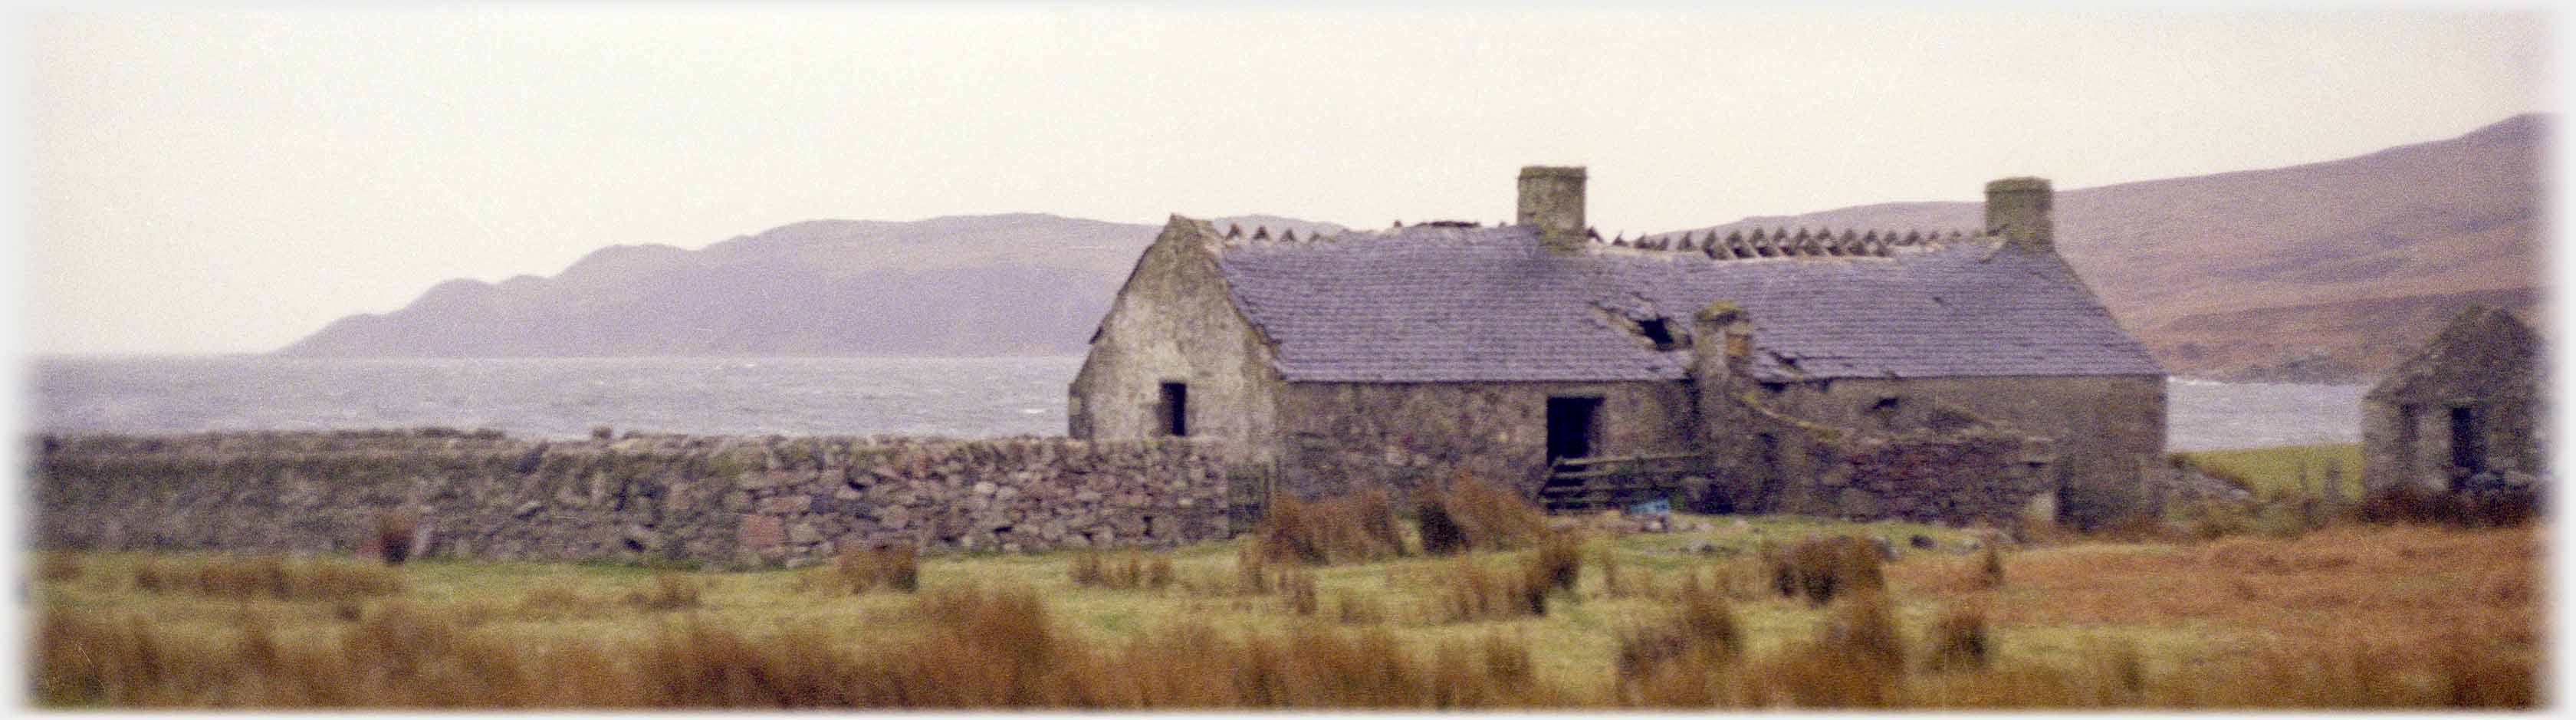 Cottage with chimnies and much of roof intact, but ridge slates missing.